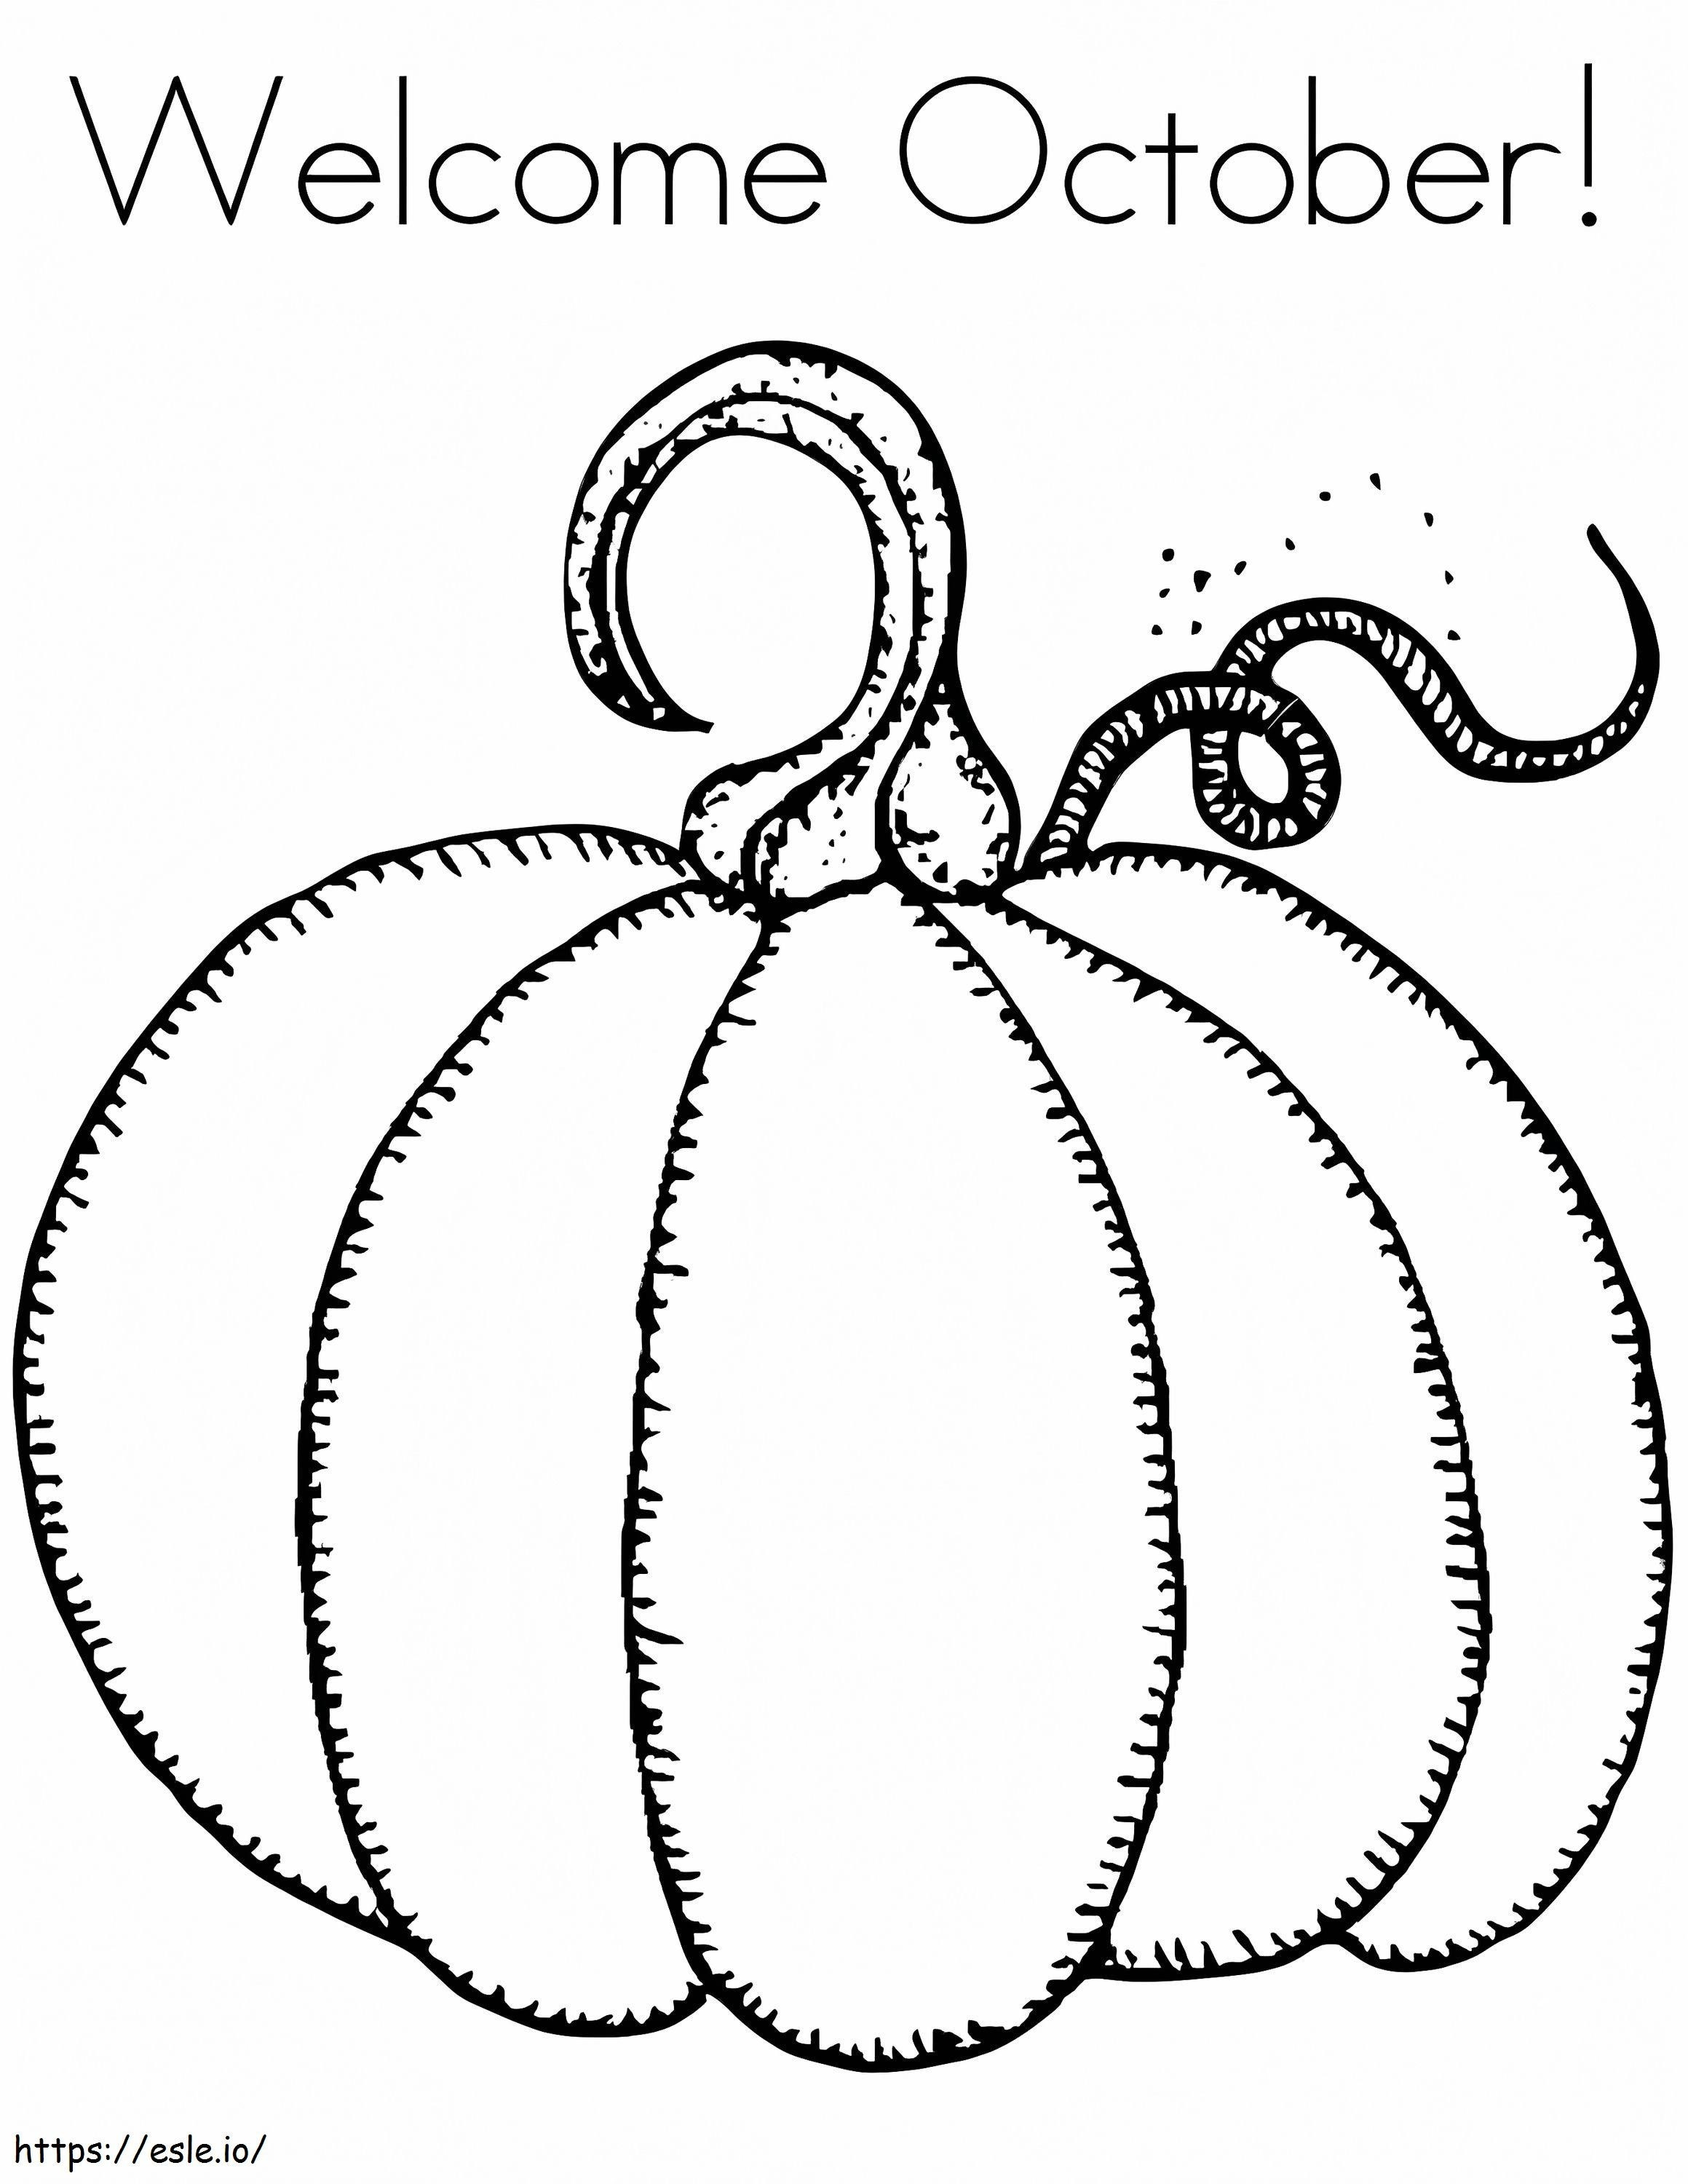 Welcome October 1 coloring page